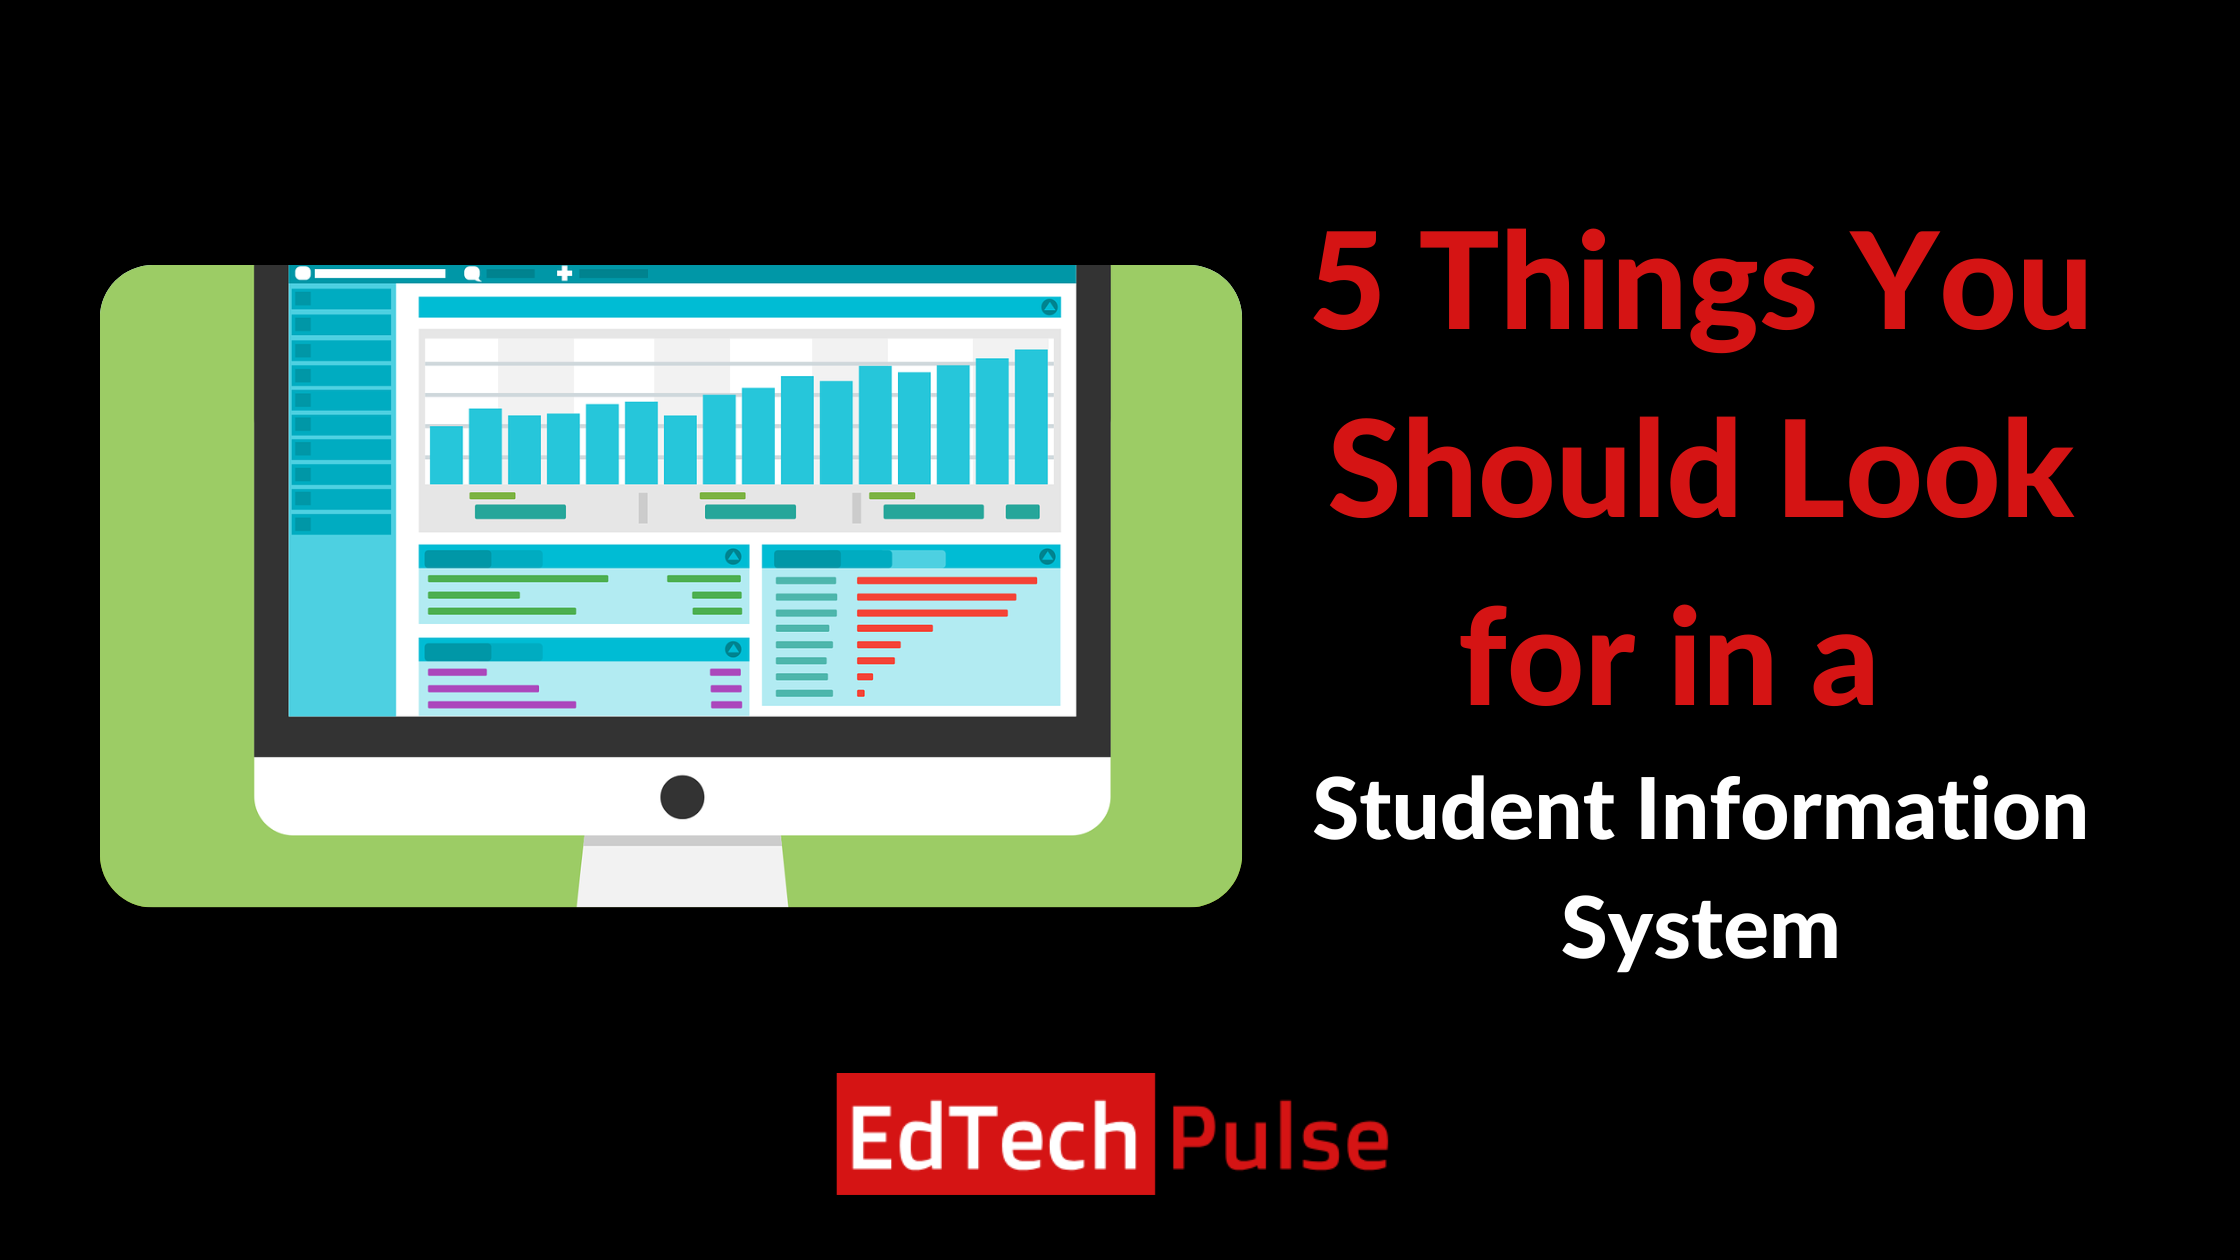 5 Things You Should Look for in a Student Information System